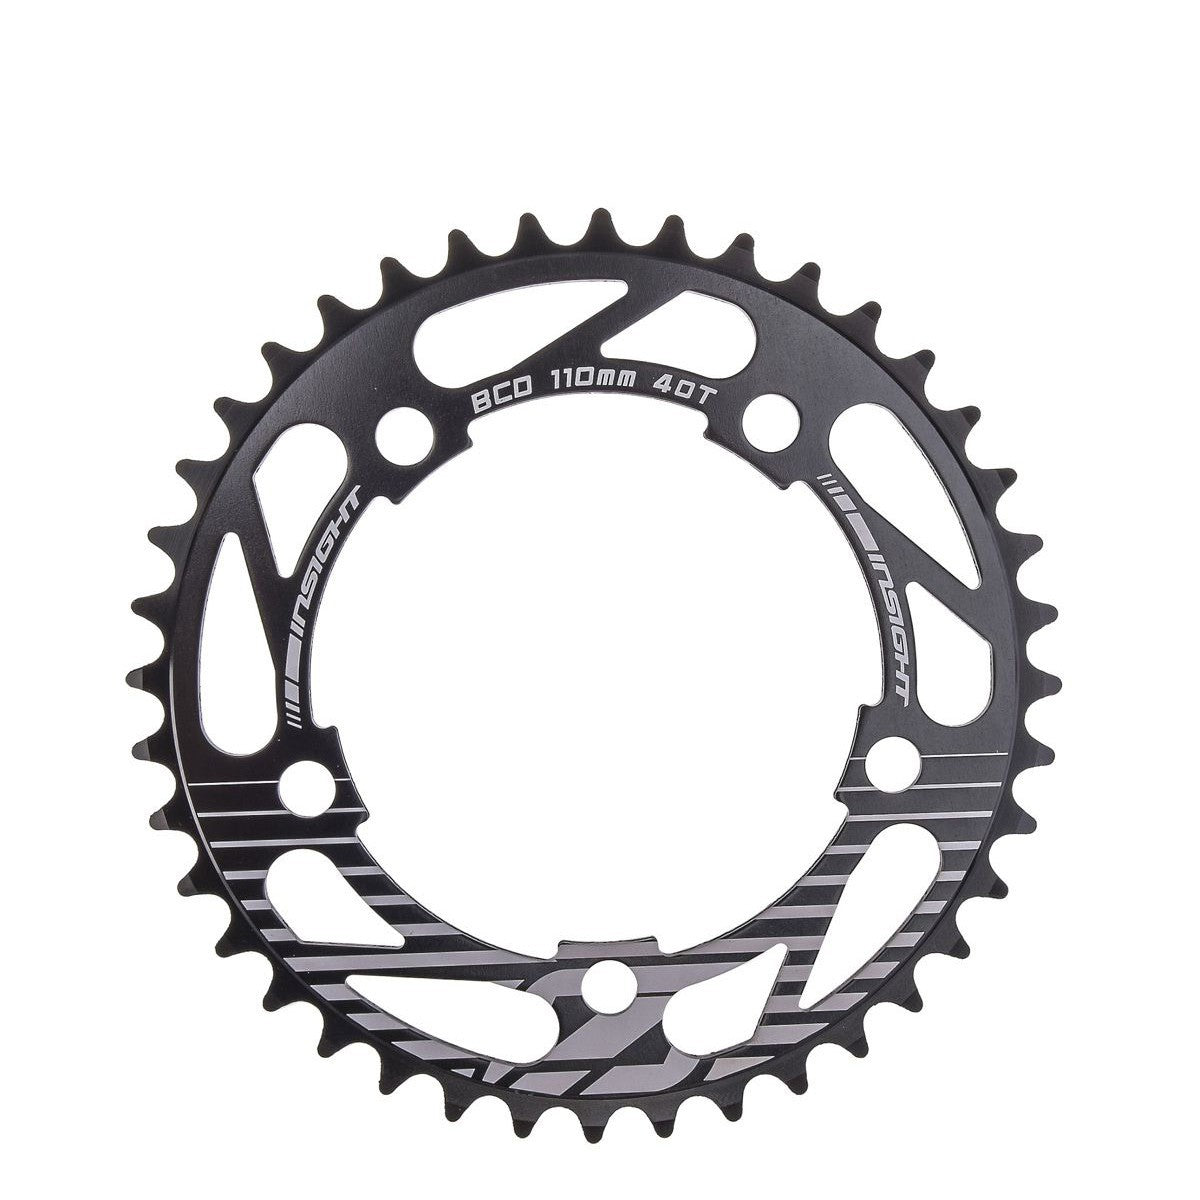 Insight 5 Bolt 110mm Chainring In Black - Downtown Bicycle Works 